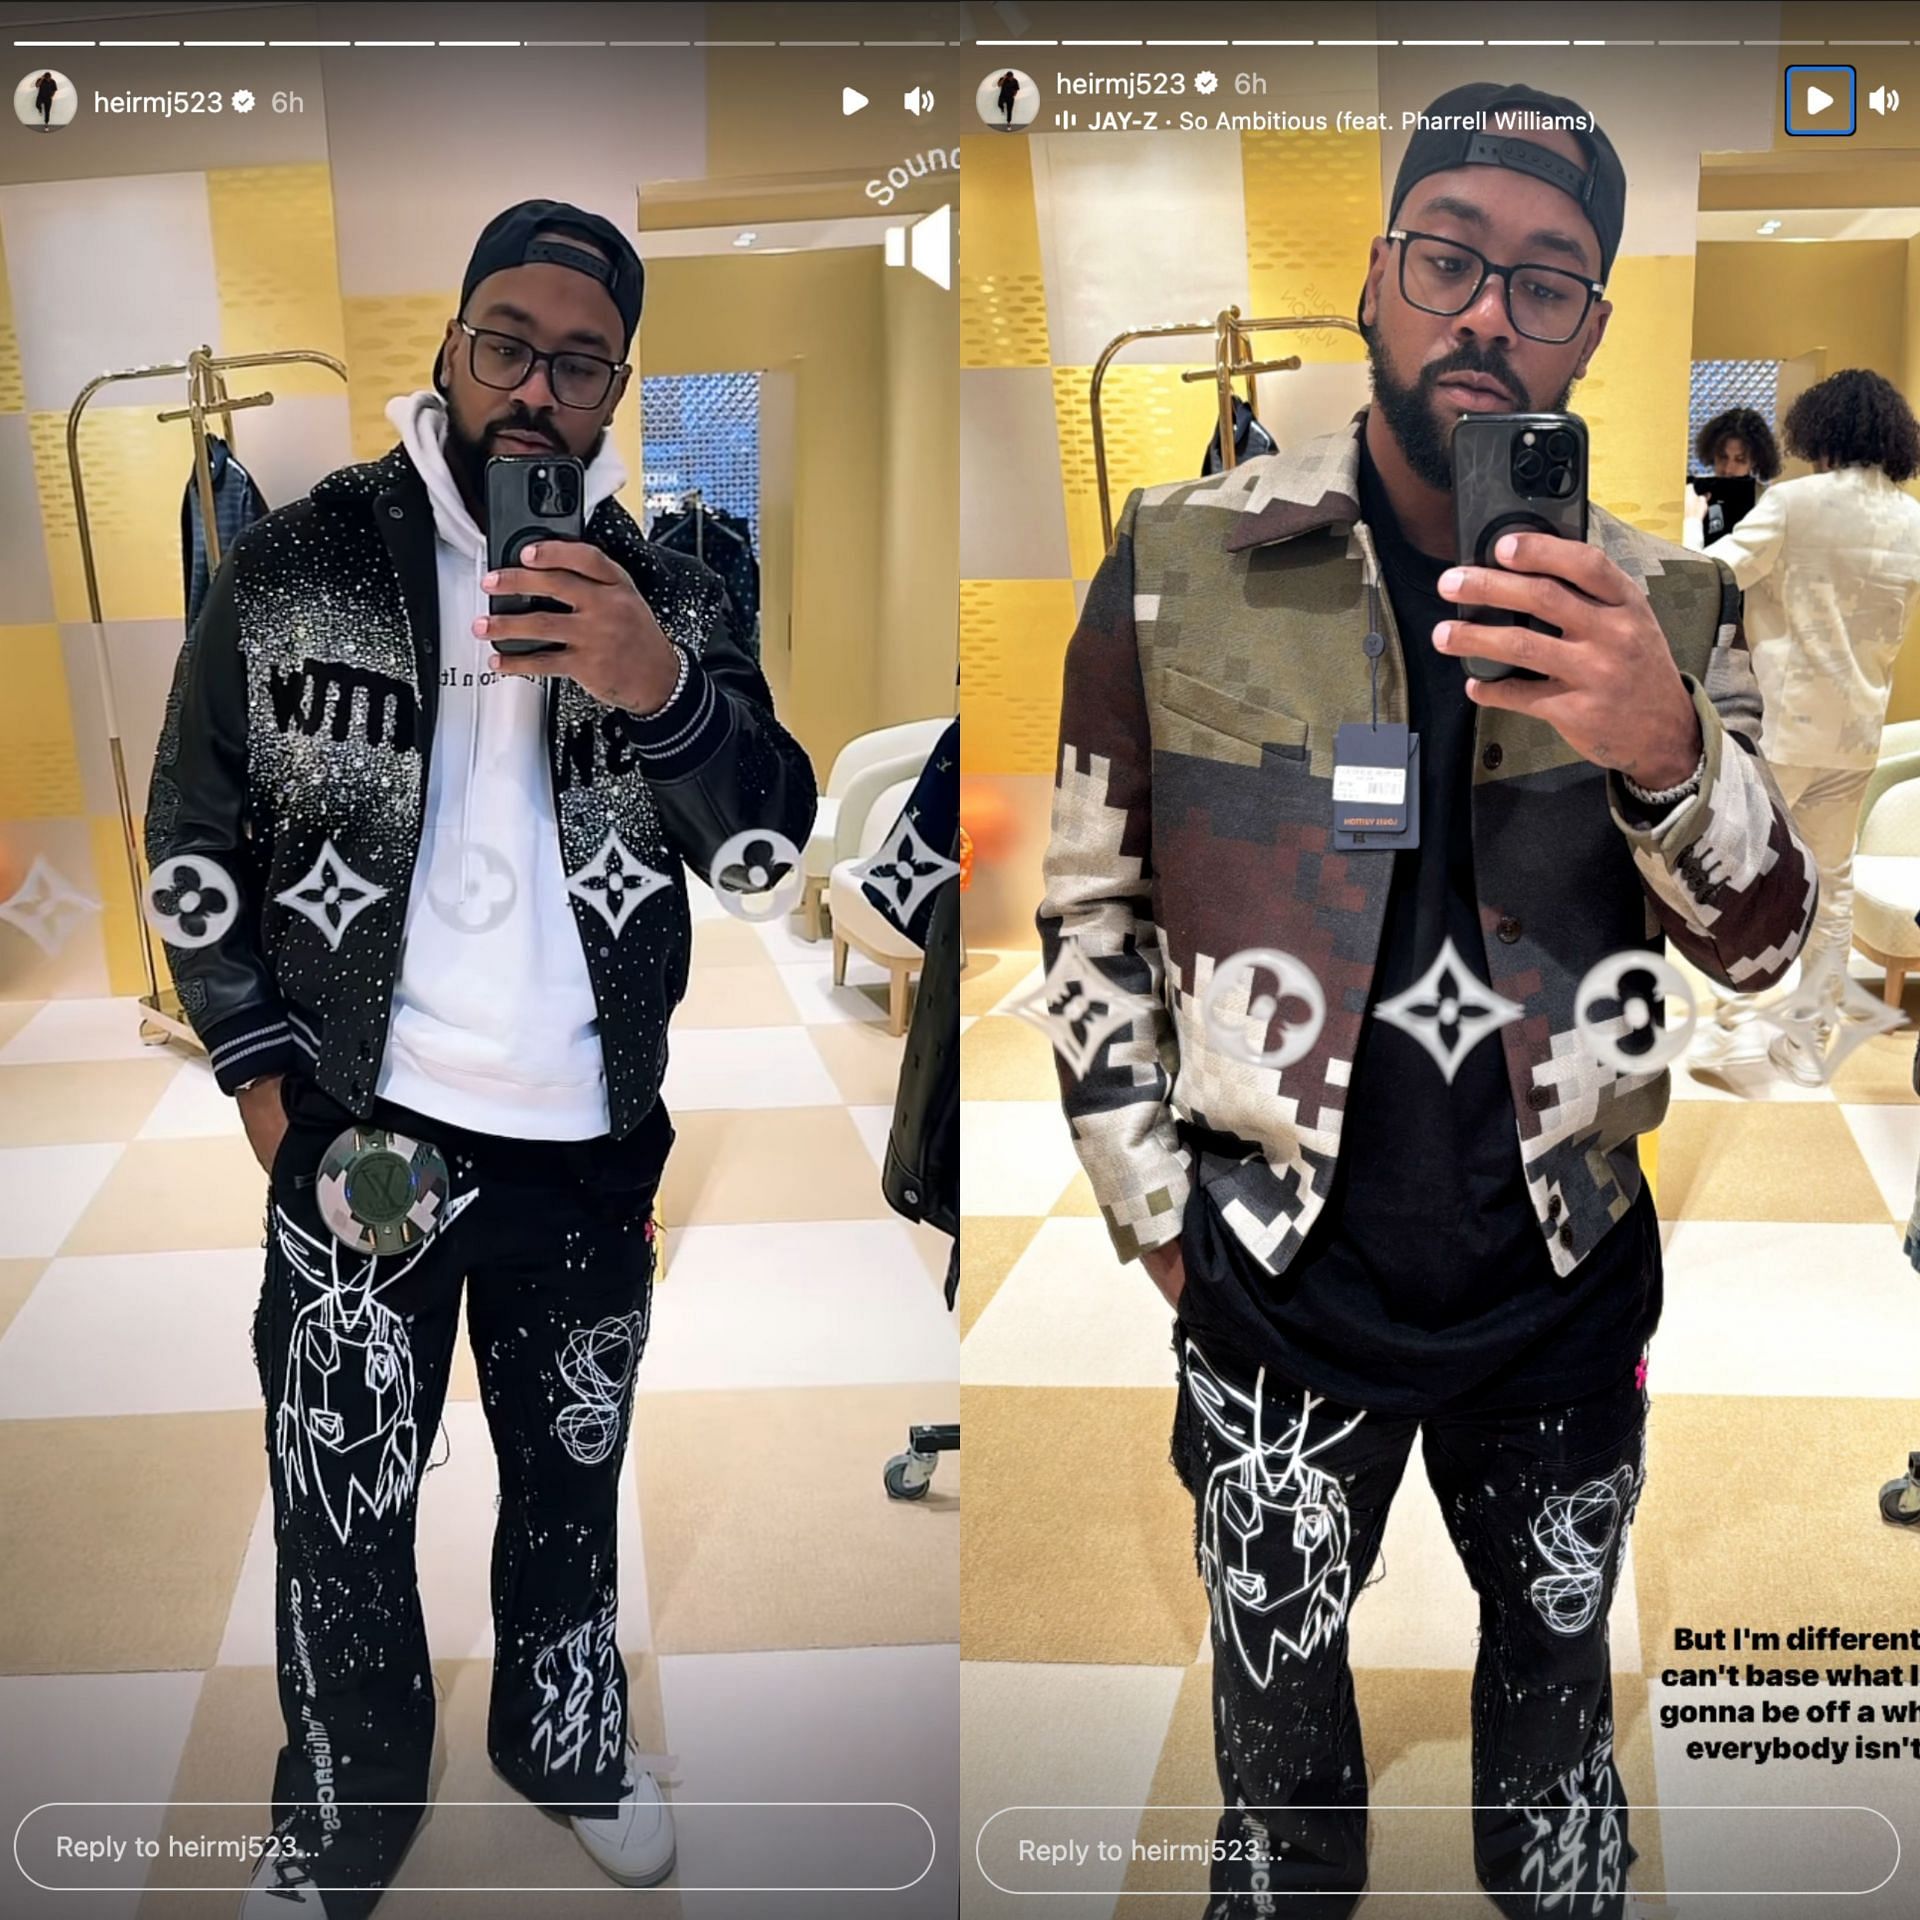 Marcus Jordan checking out his LV outfit (Image source: Instagram @heirmj523)